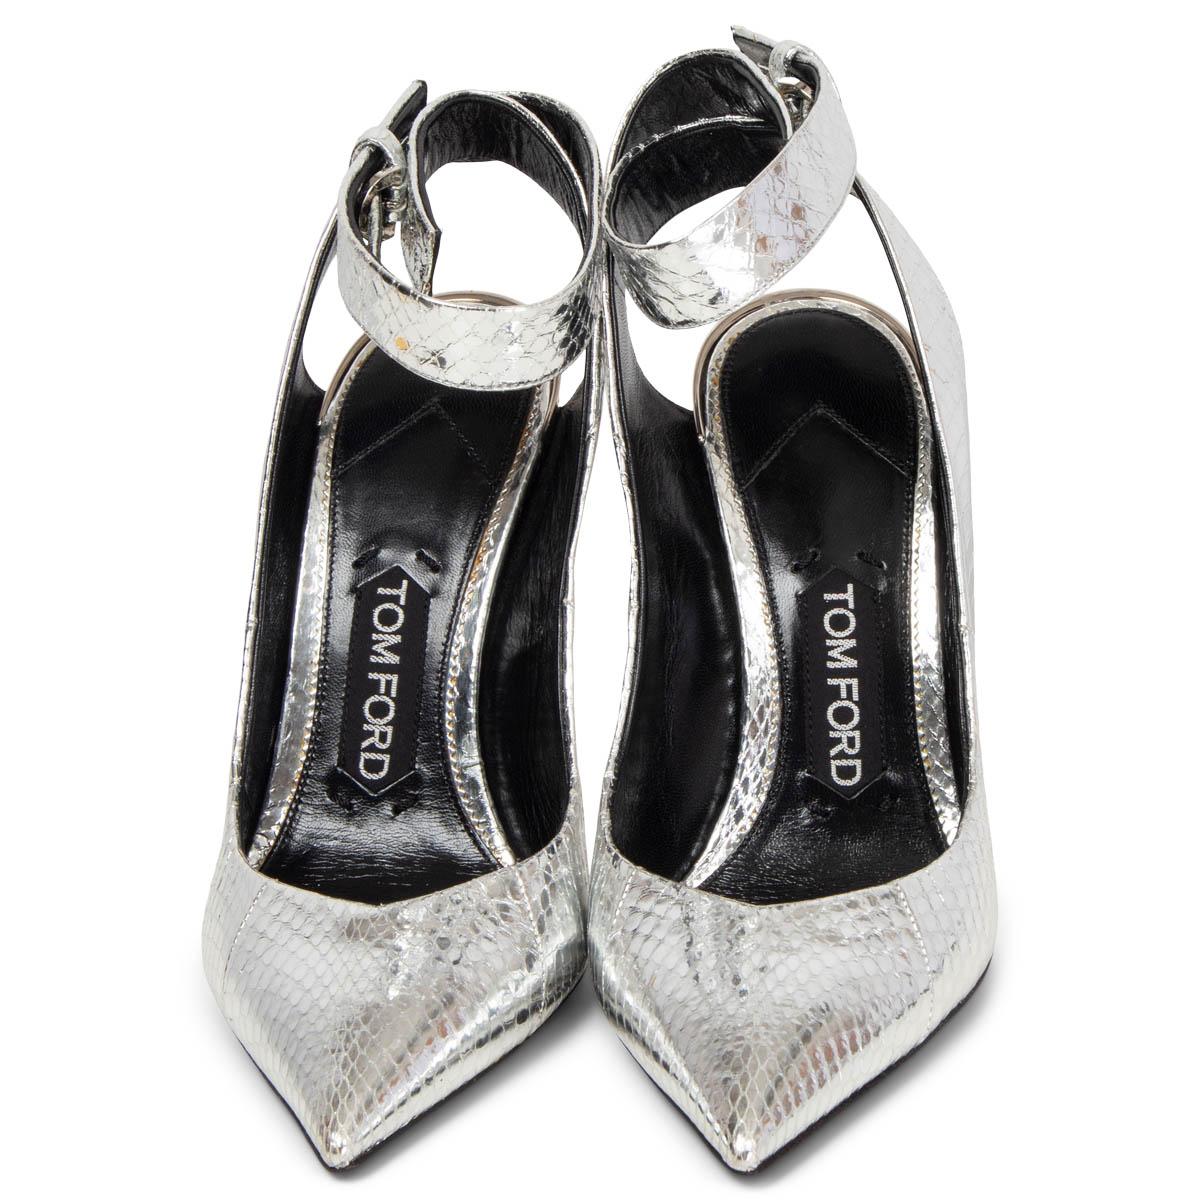 100% authentic Tom Ford pointed-toe wedge sandals in metallic silver python features a hidden ankle-strap buckle closure. Have been worn once and are in virtually new condition. Come with dust bag. 

Measurements
Imprinted Size	37
Shoe